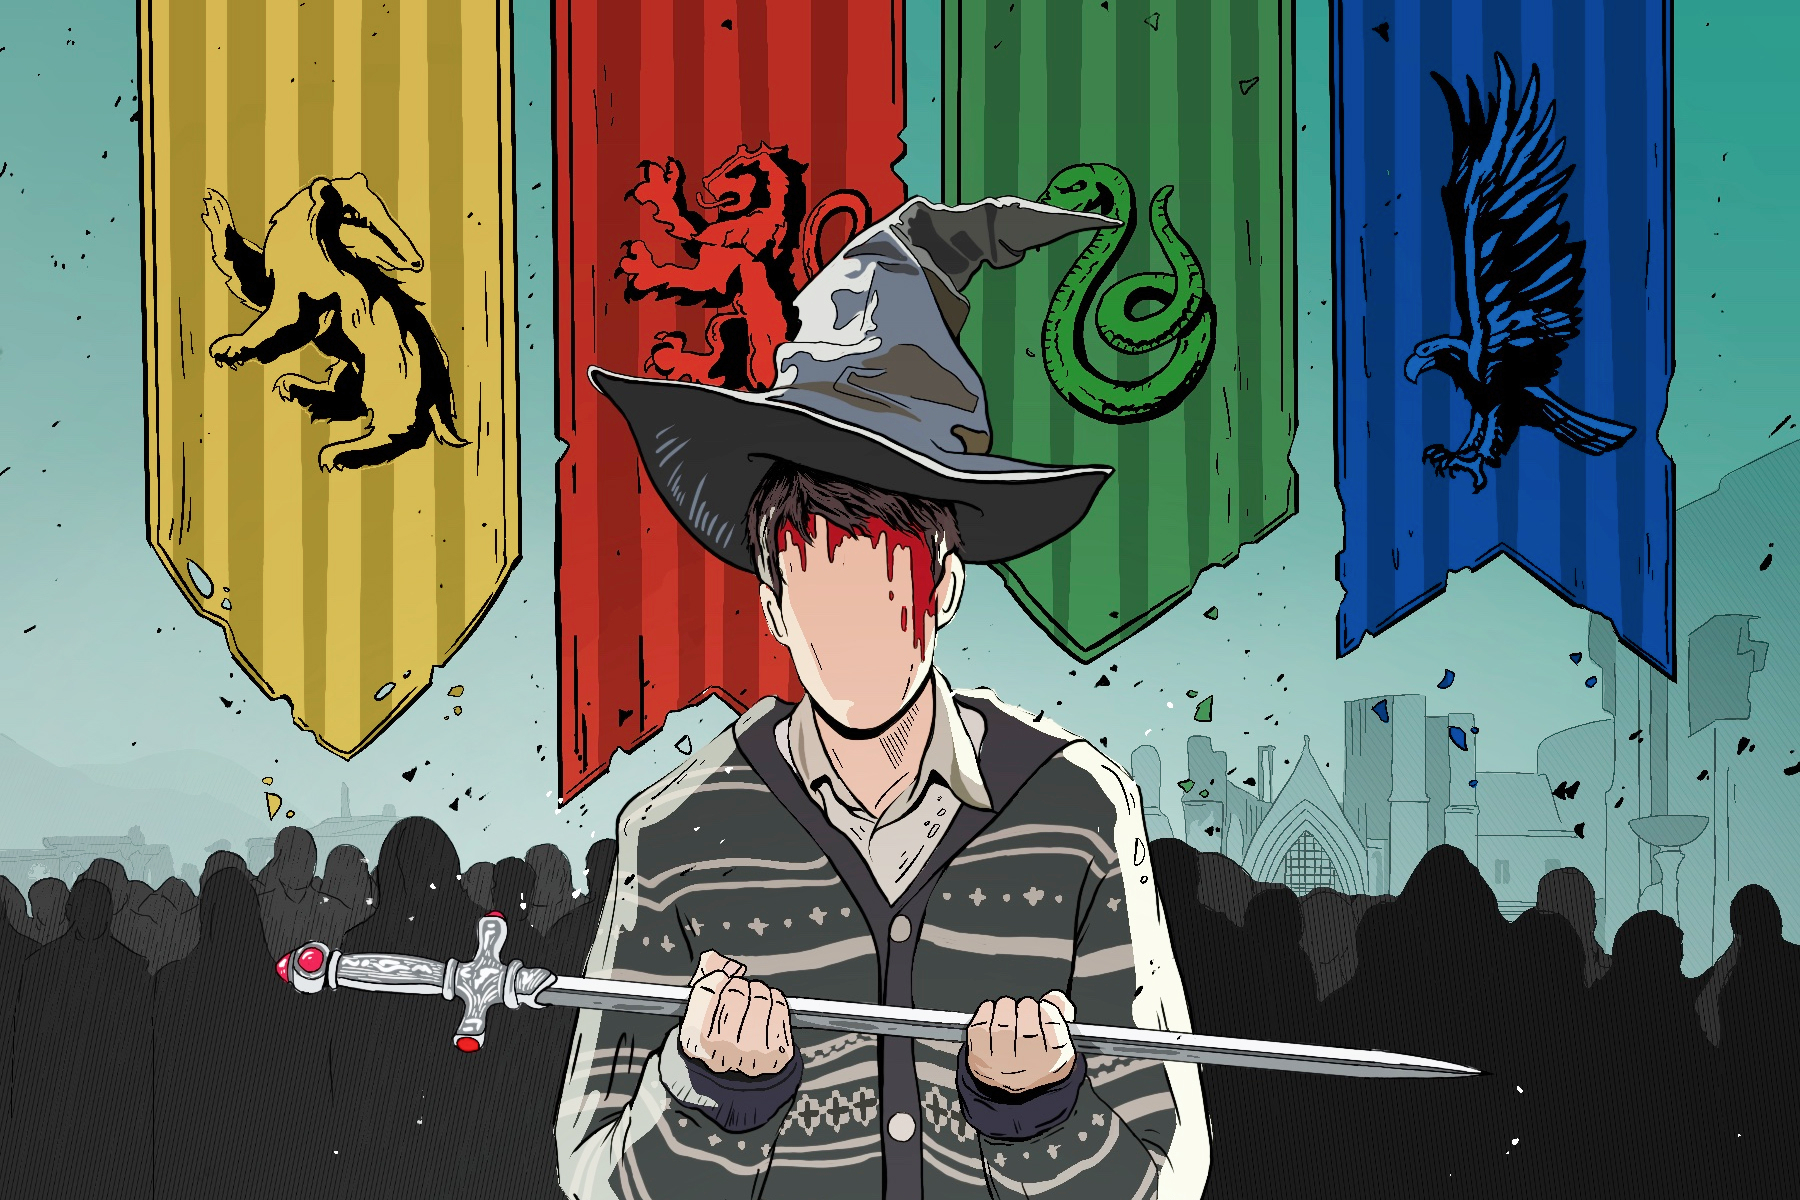 Sorting Hat Quizzes Undermine a Central Theme of Potter'